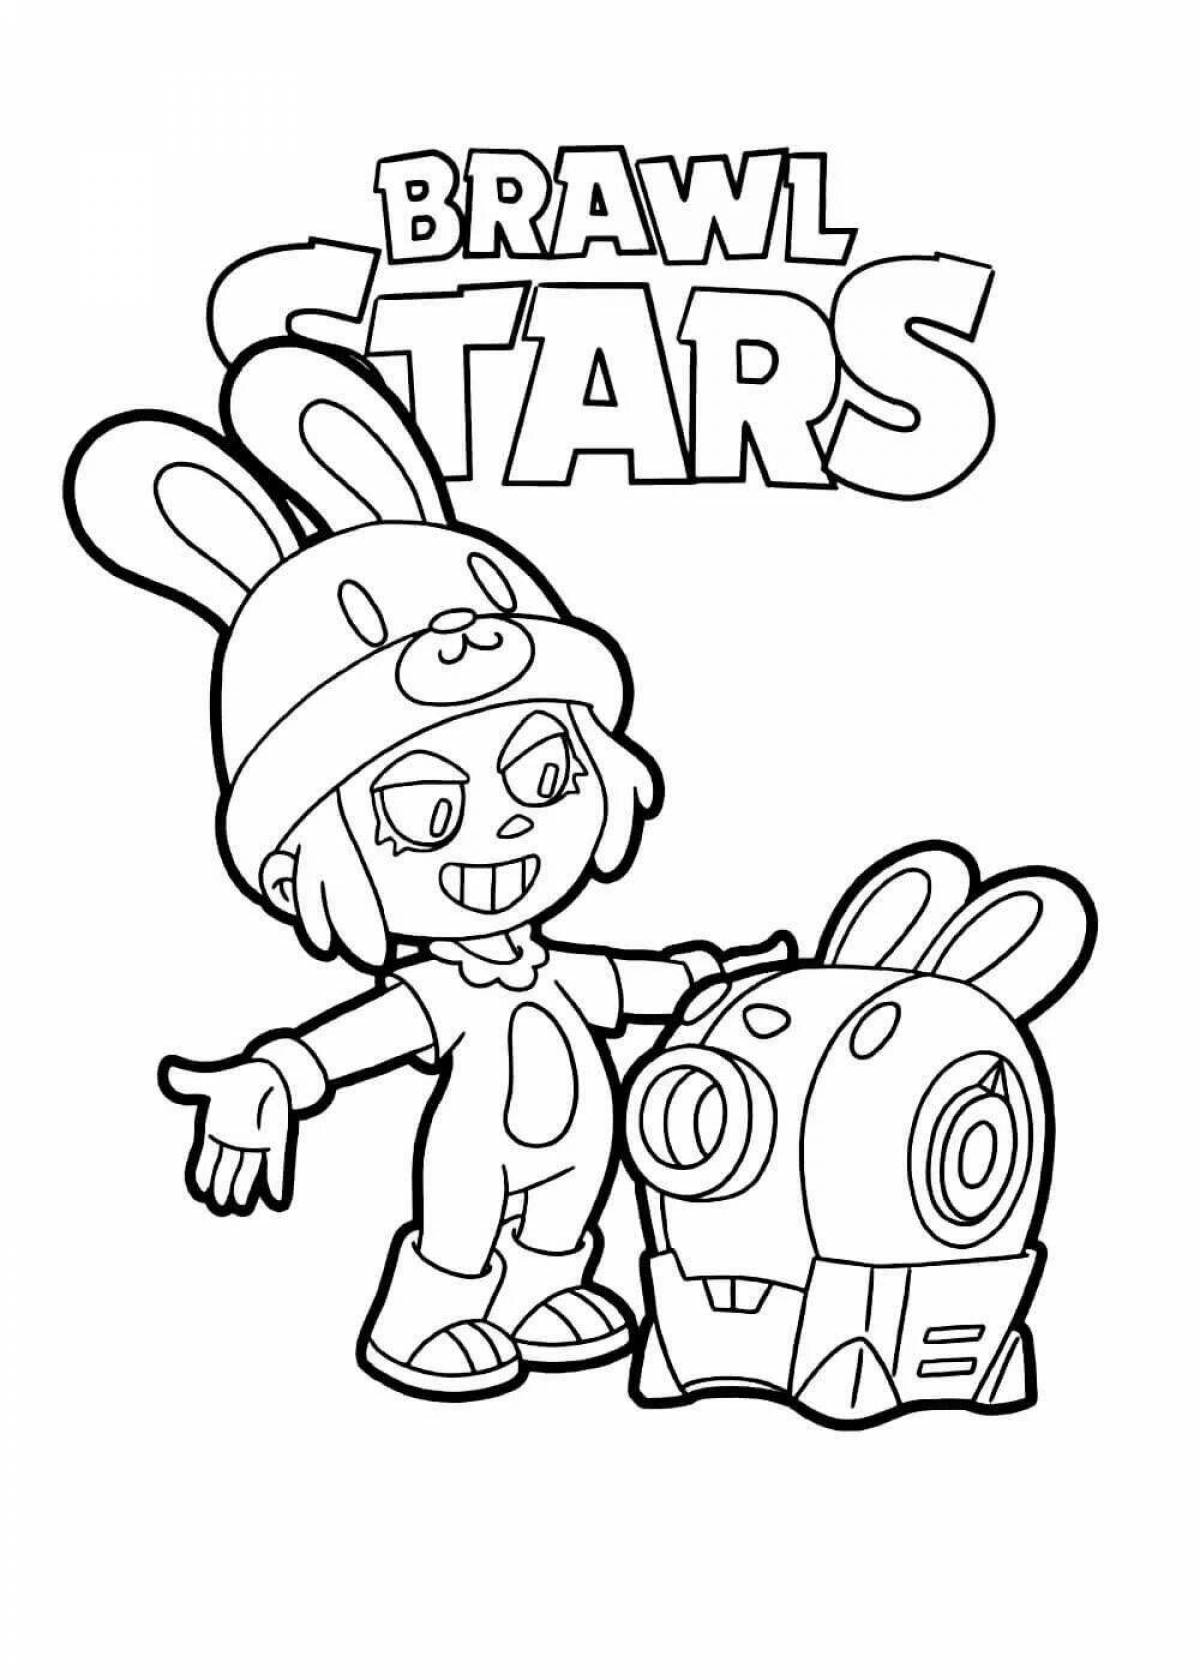 Fun coloring pages with stars